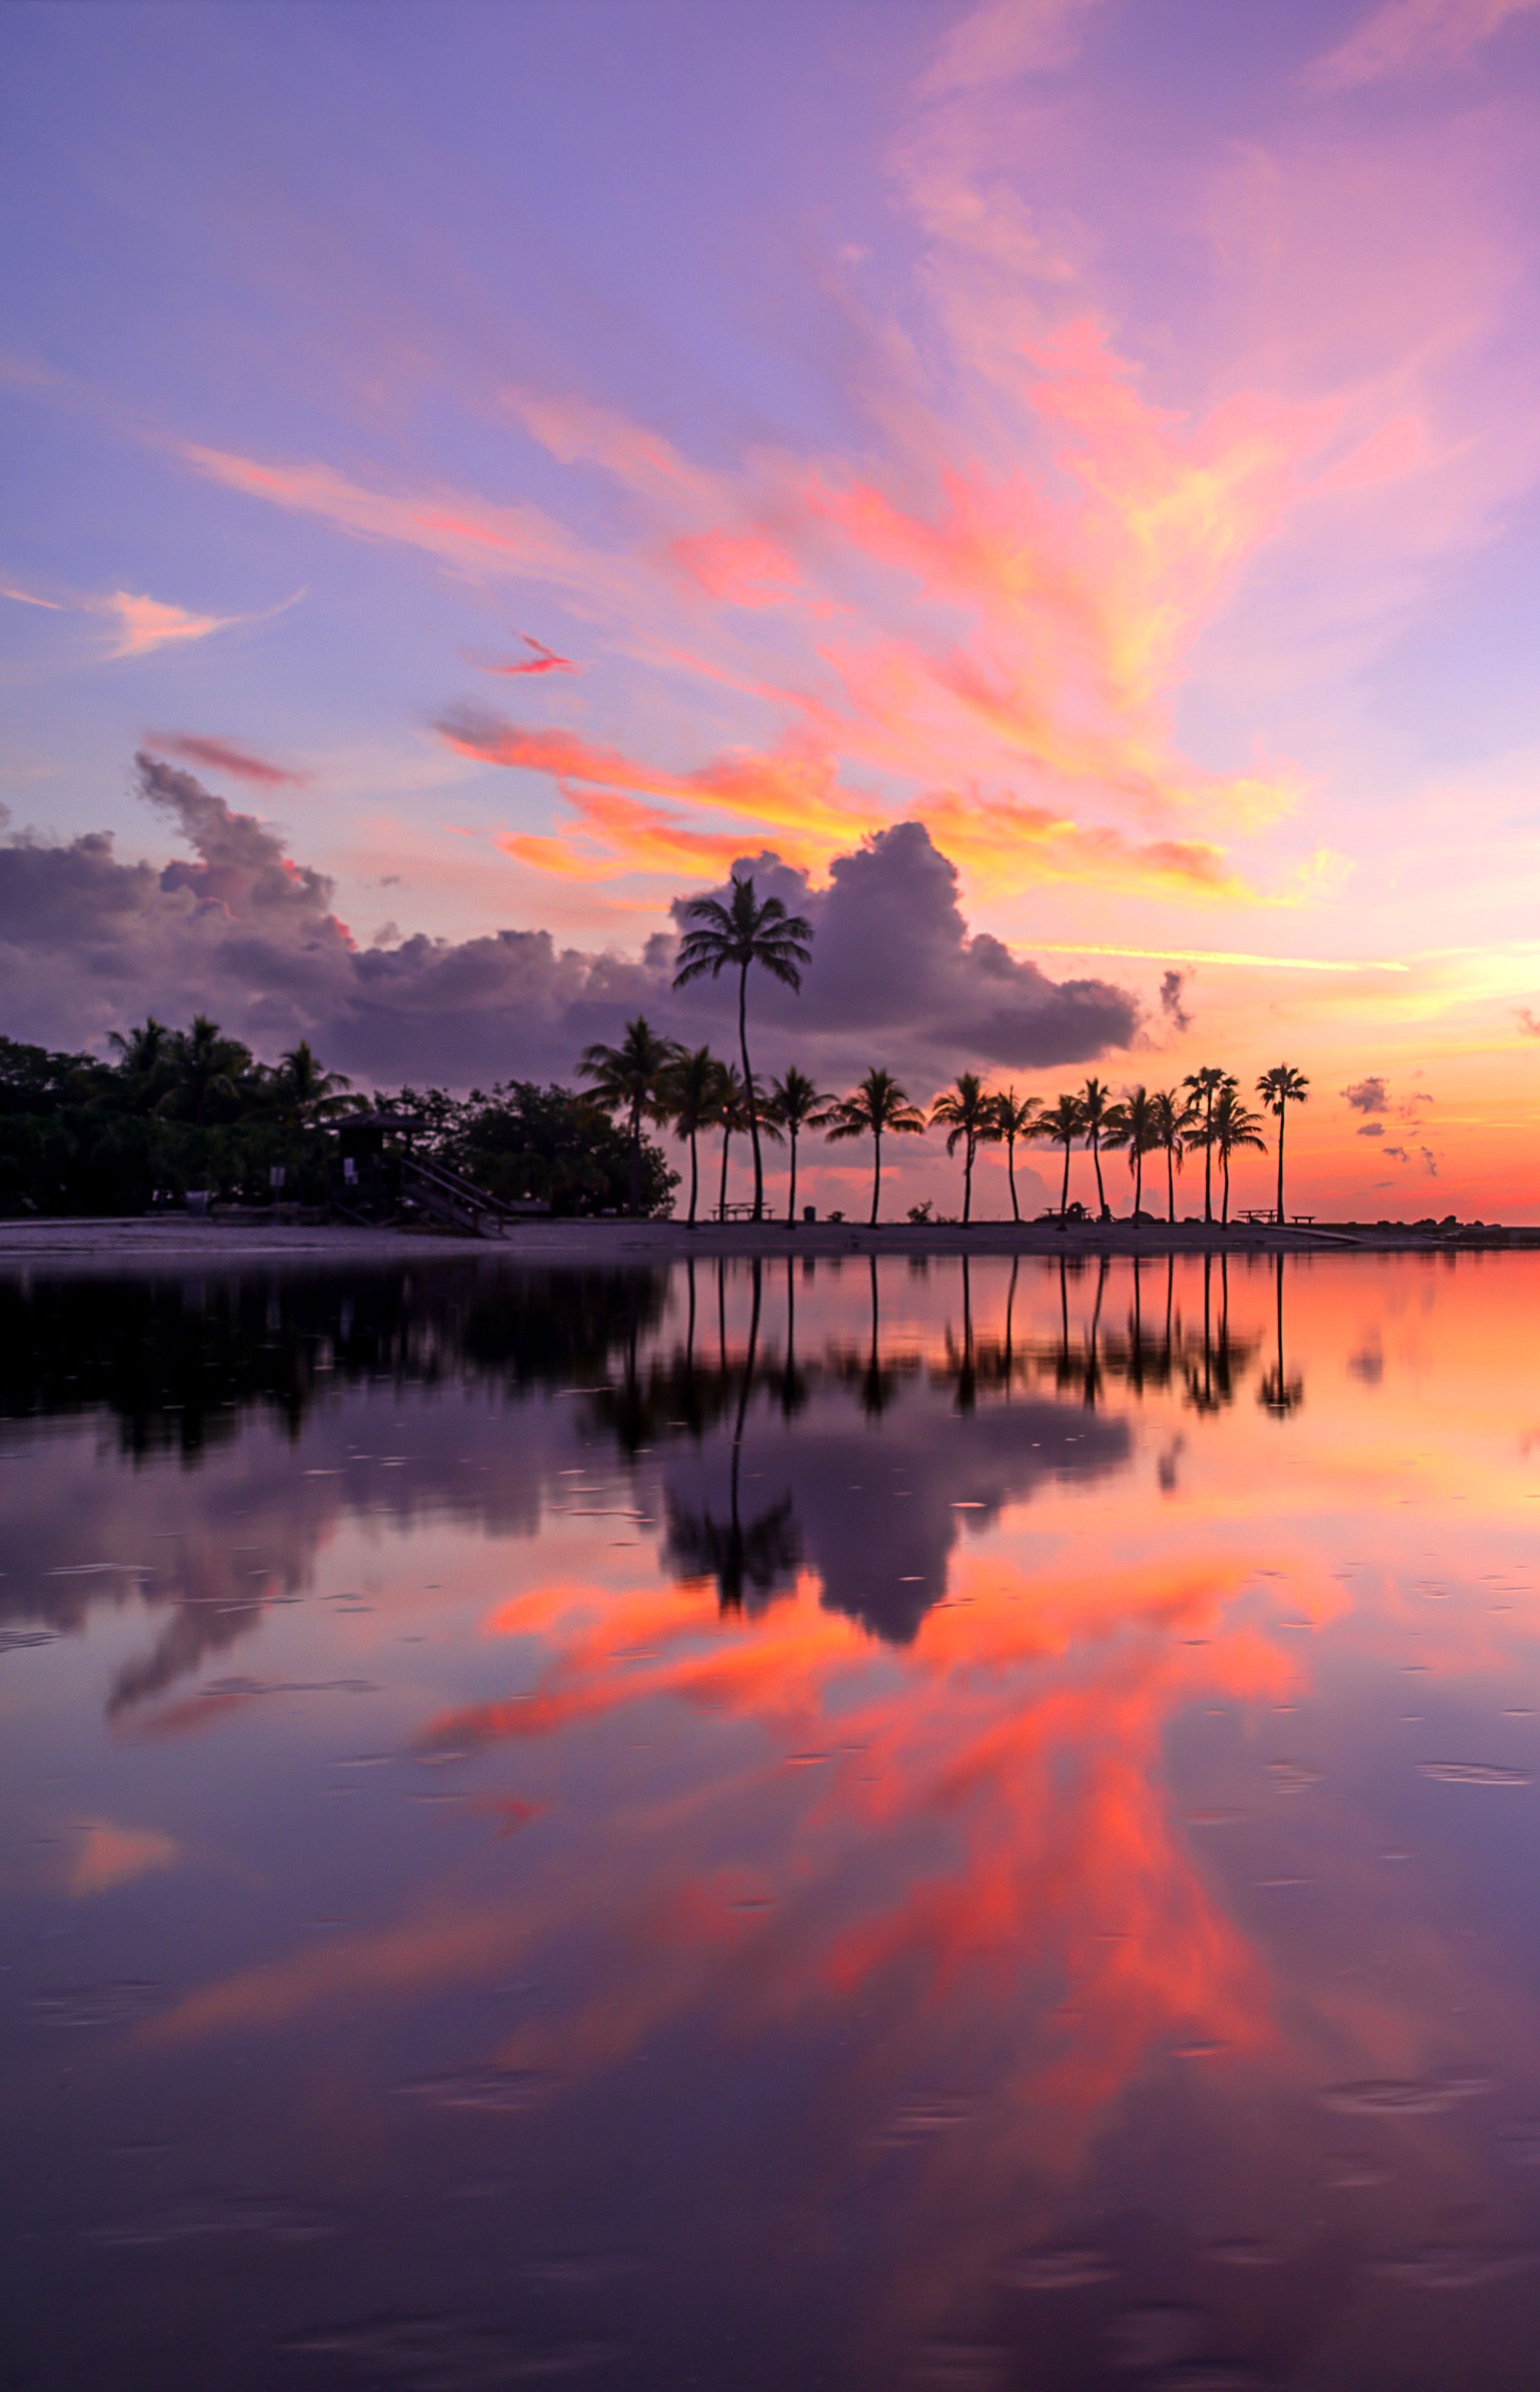 A beautiful sunset with palm trees and their reflection in the water. - Miami, Florida